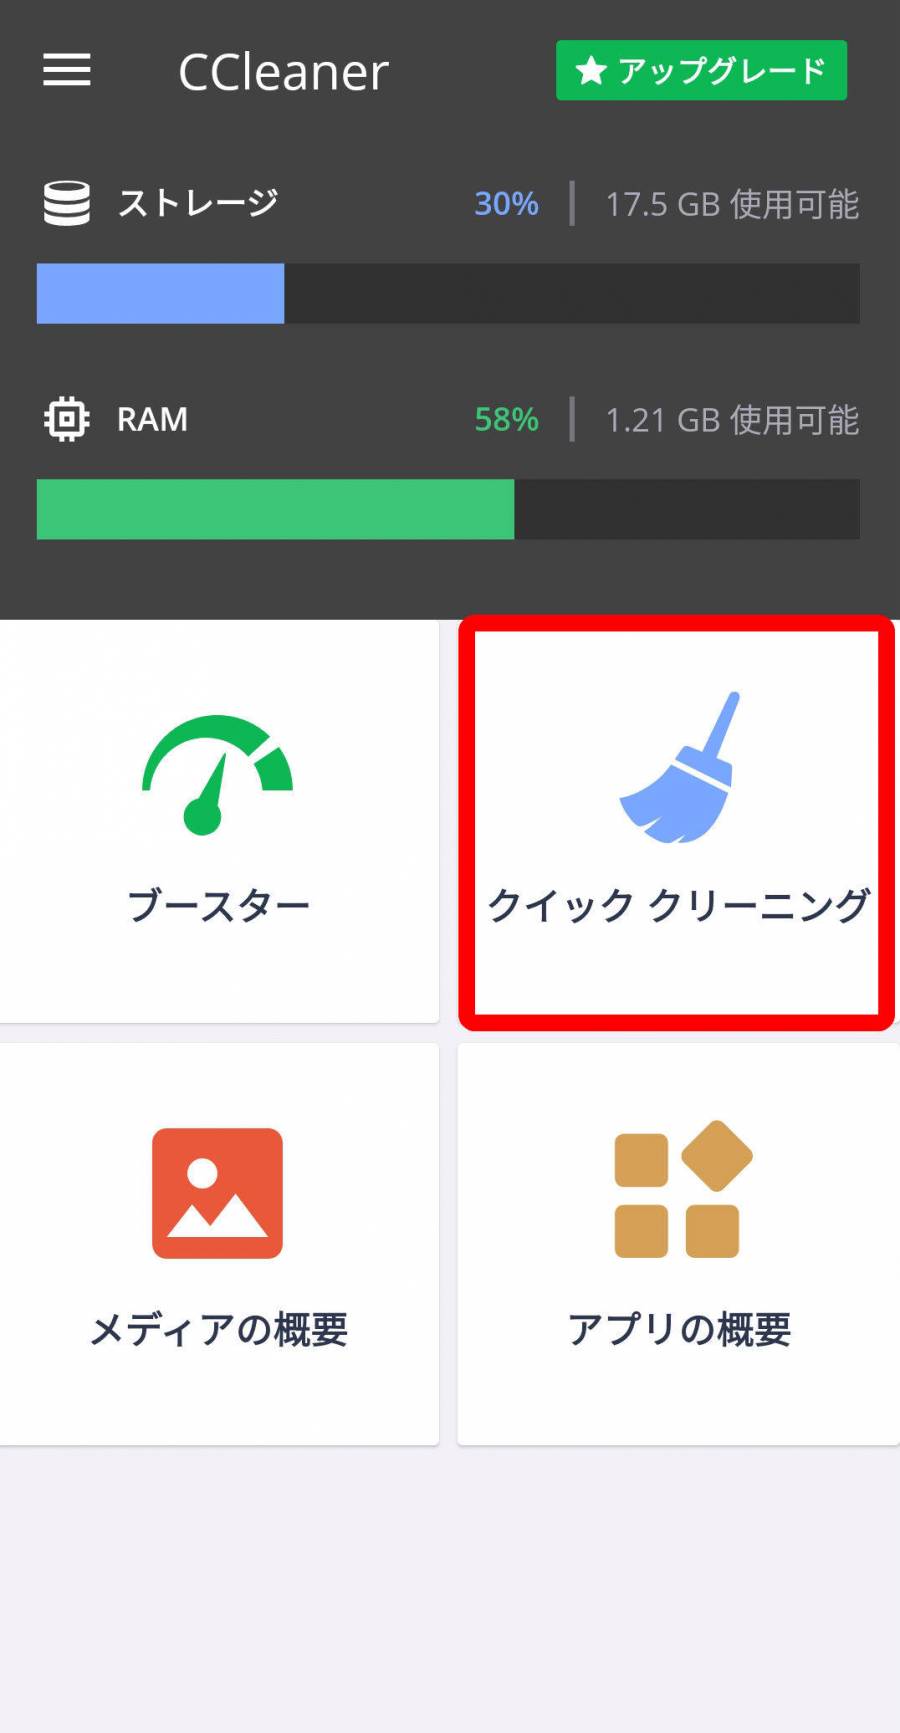 Androidアプリ「CCleaner」のトップ画面